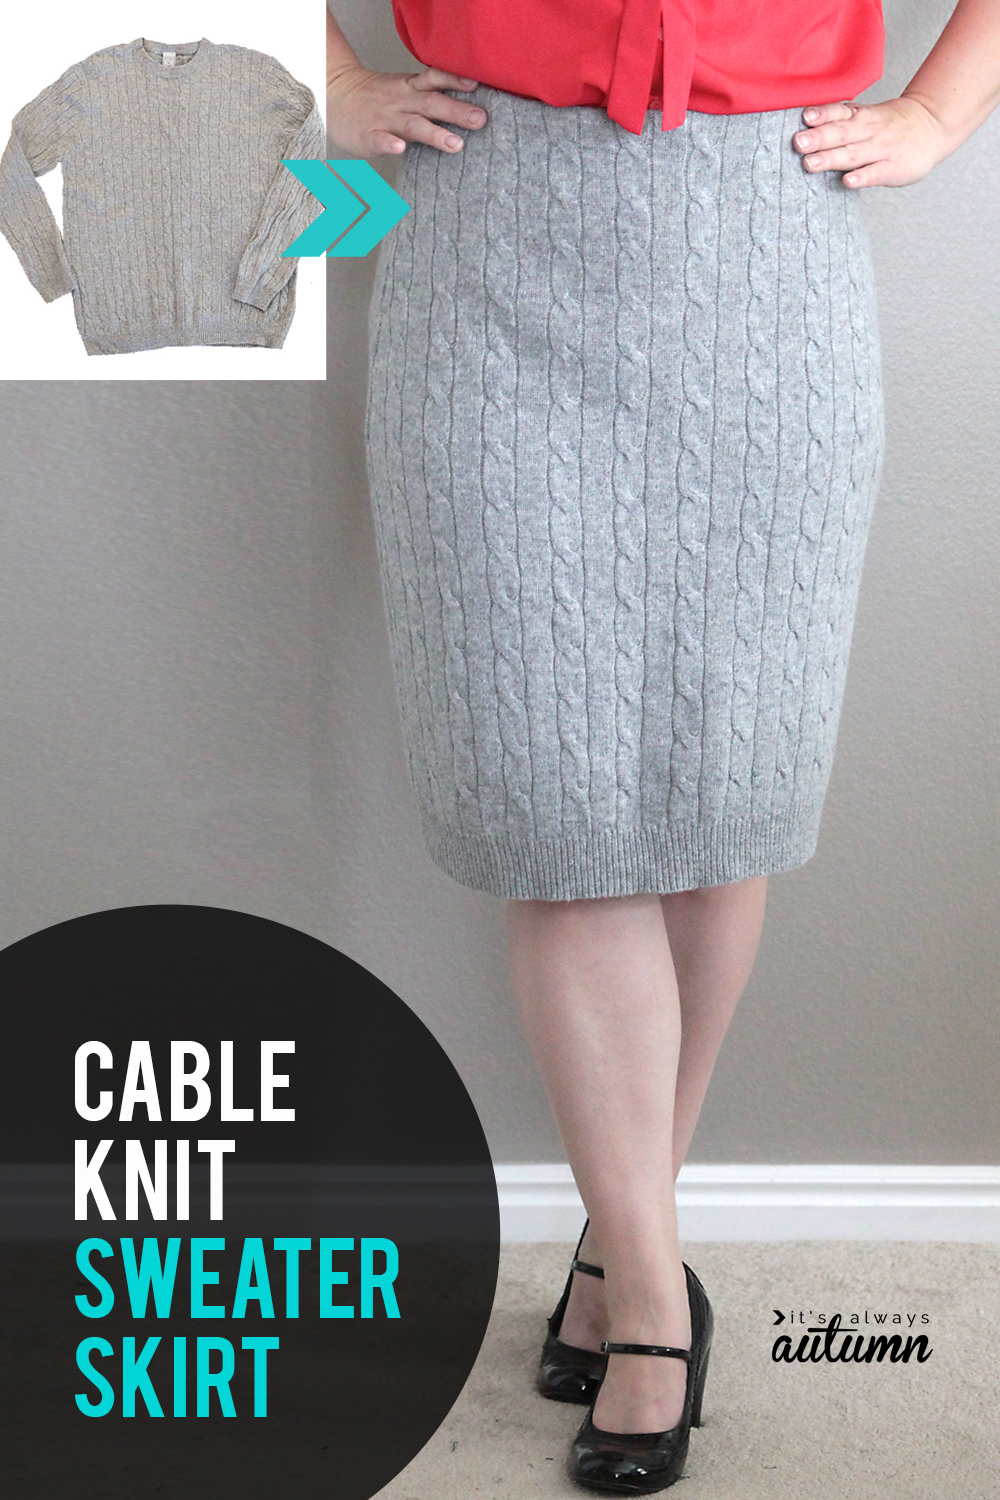 How to refashion a cable knit sweater into a cute cable knit skirt! Easy sewing tutorial.